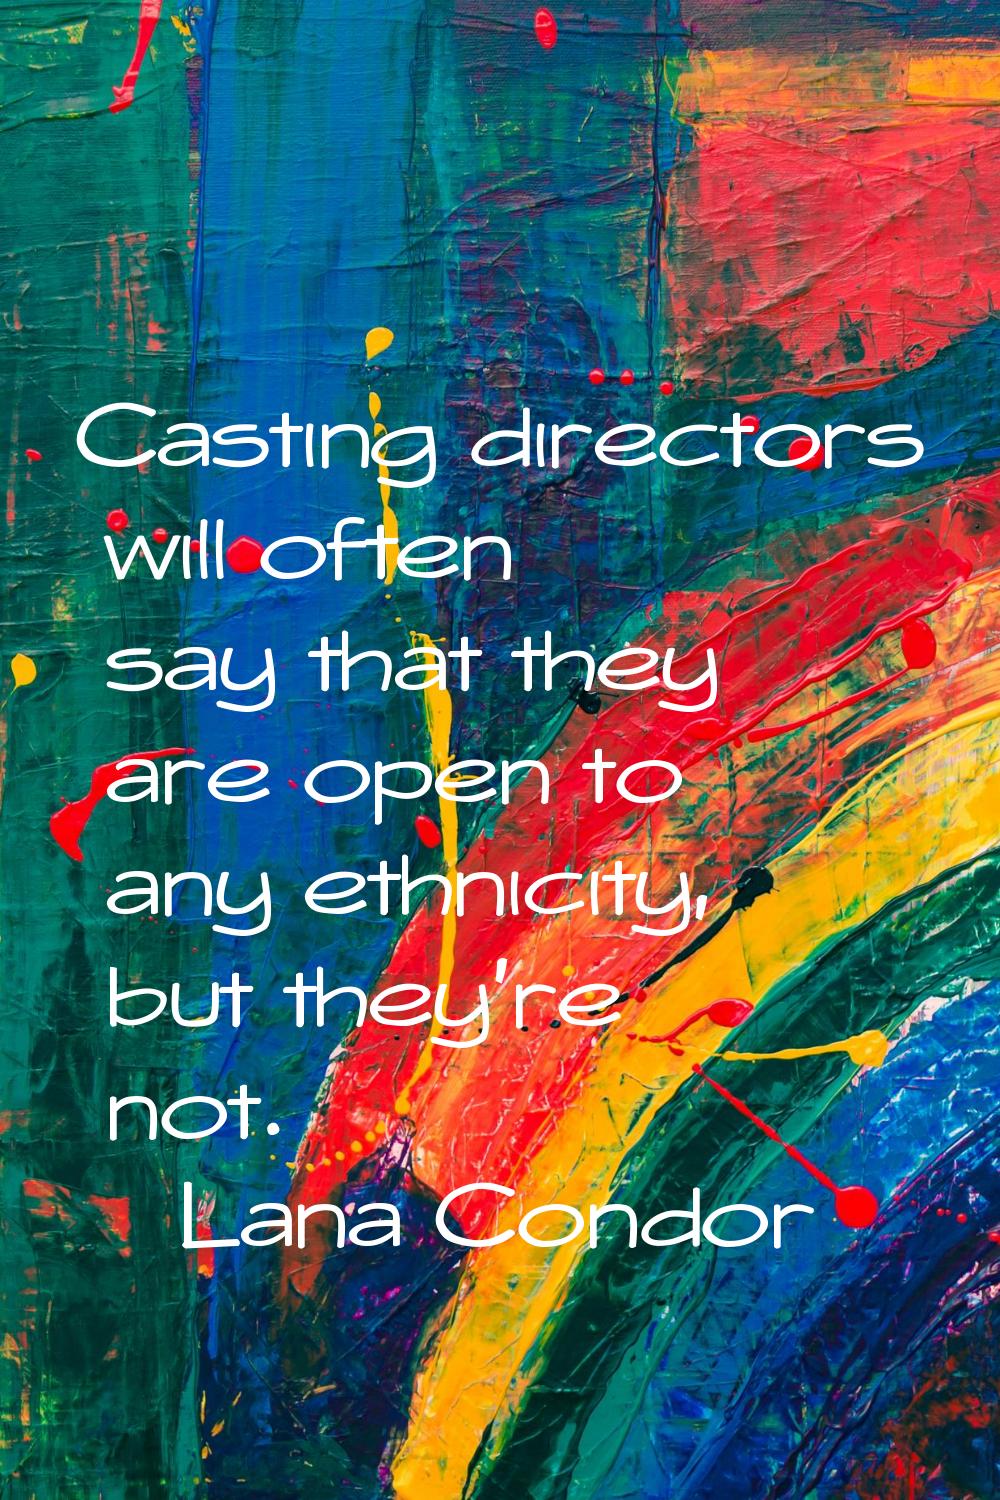 Casting directors will often say that they are open to any ethnicity, but they're not.